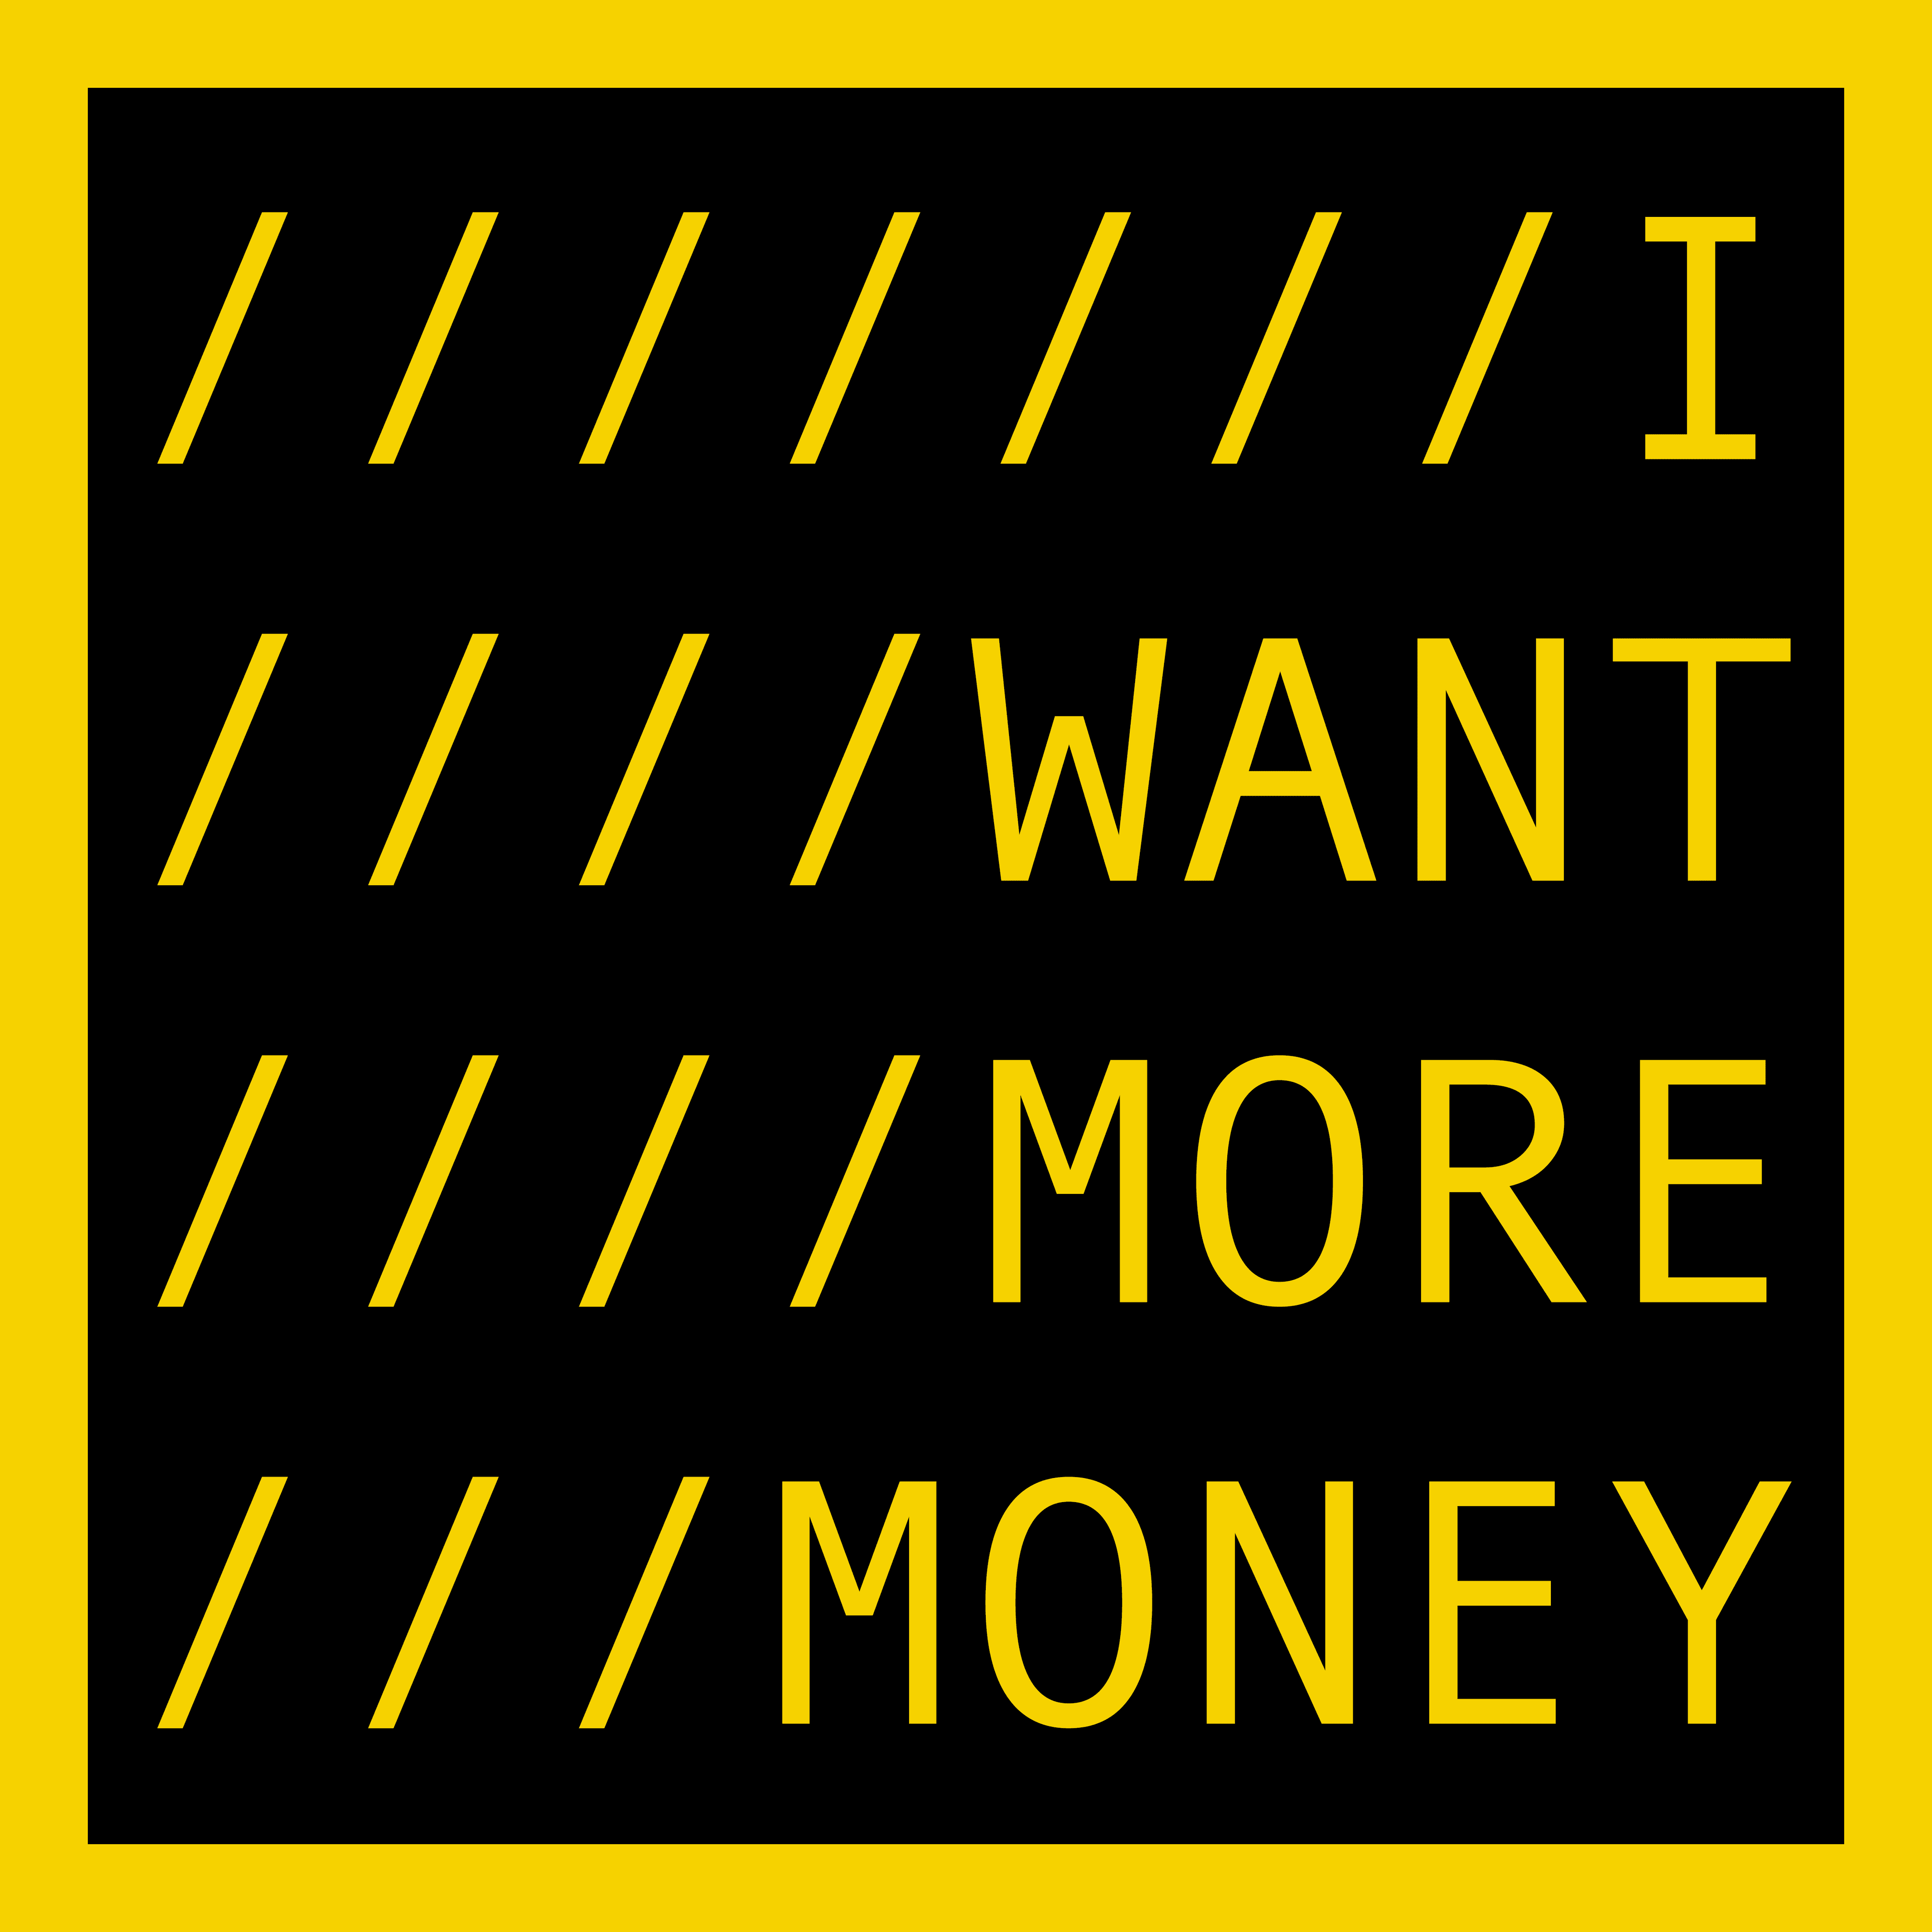 I WANT MORE MONEY